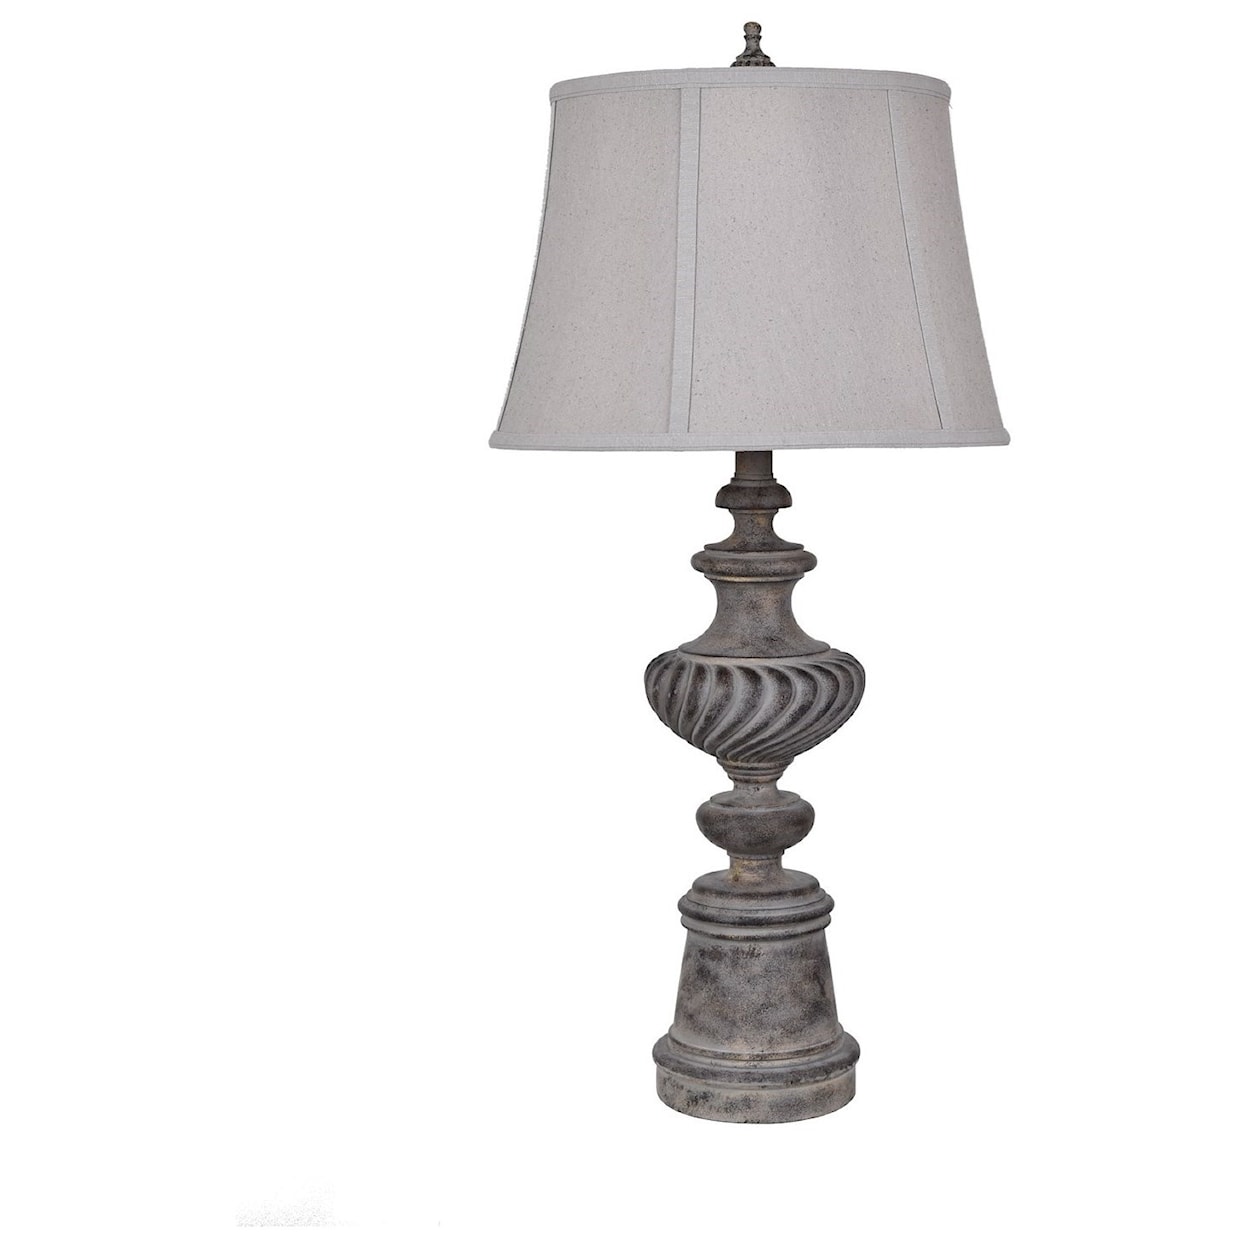 Crestview Collection Lighting Kinsley Table Lamp